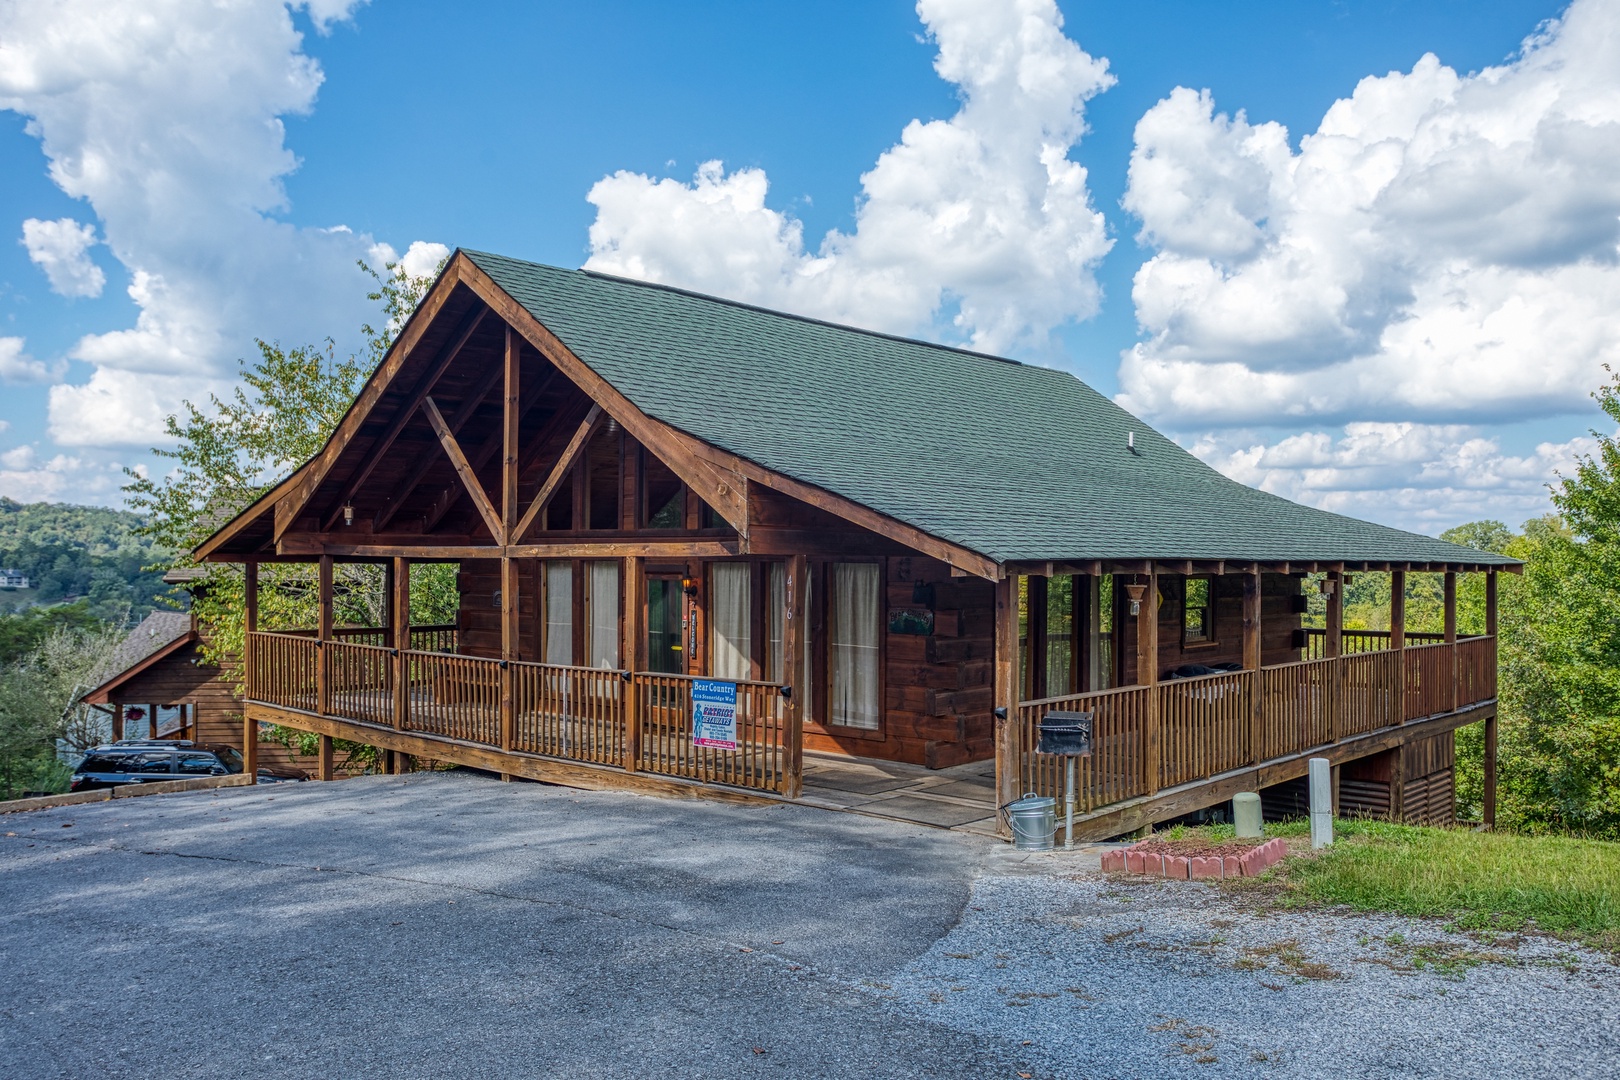 Flat parking and the main entrance at Bear Country, a 3-bedroom cabin rental located in Pigeon Forge